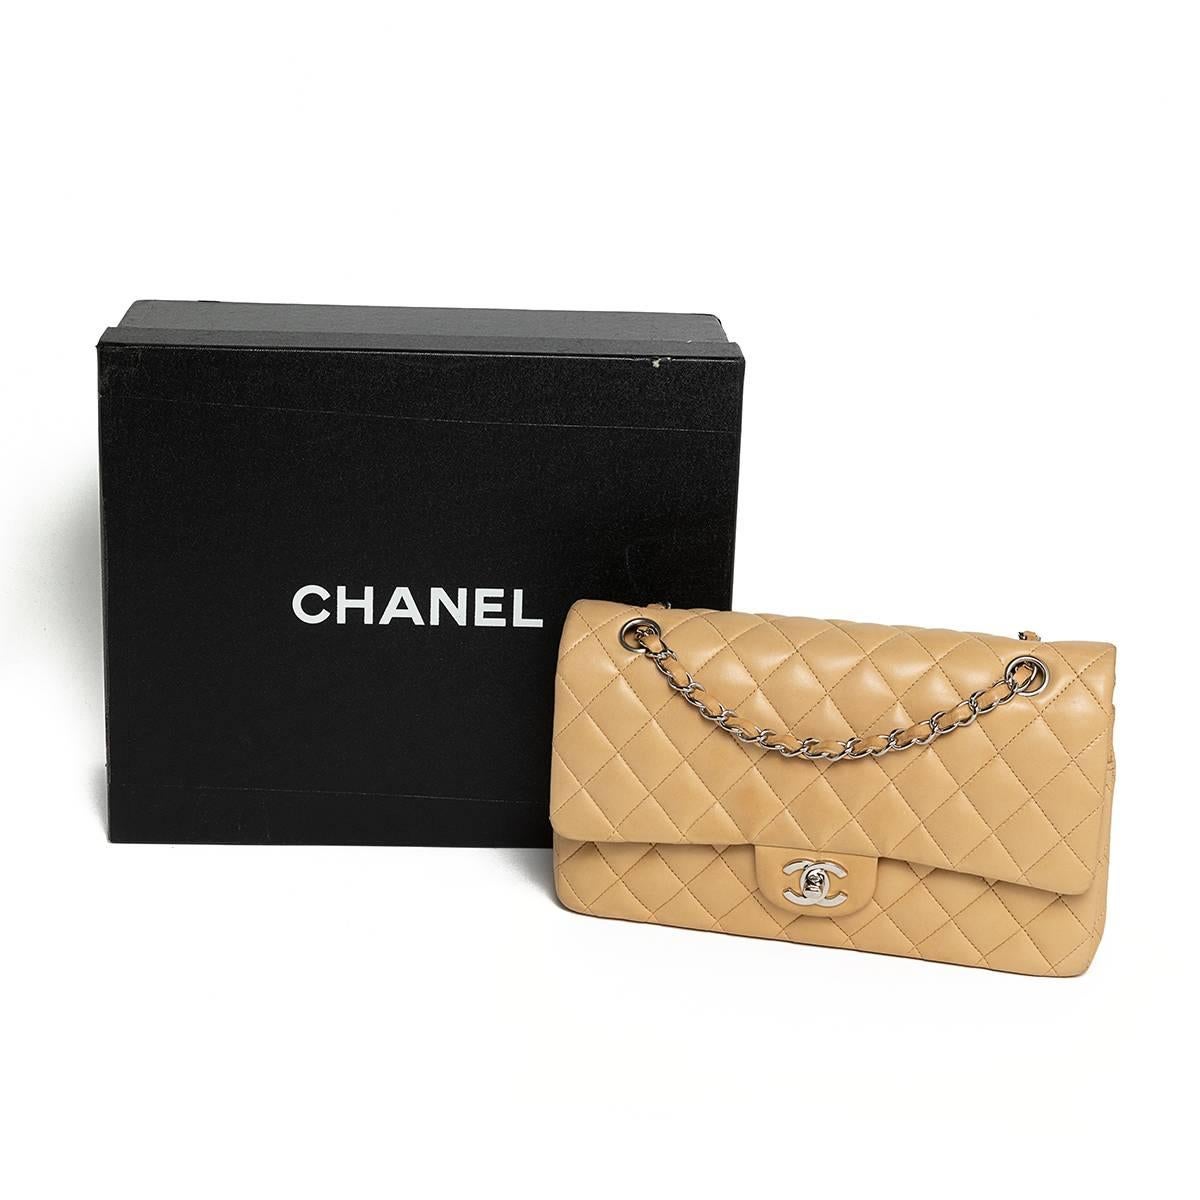 2005 Chanel 2.55 Quilted Matelasse Beige Lambskin  For Sale 2